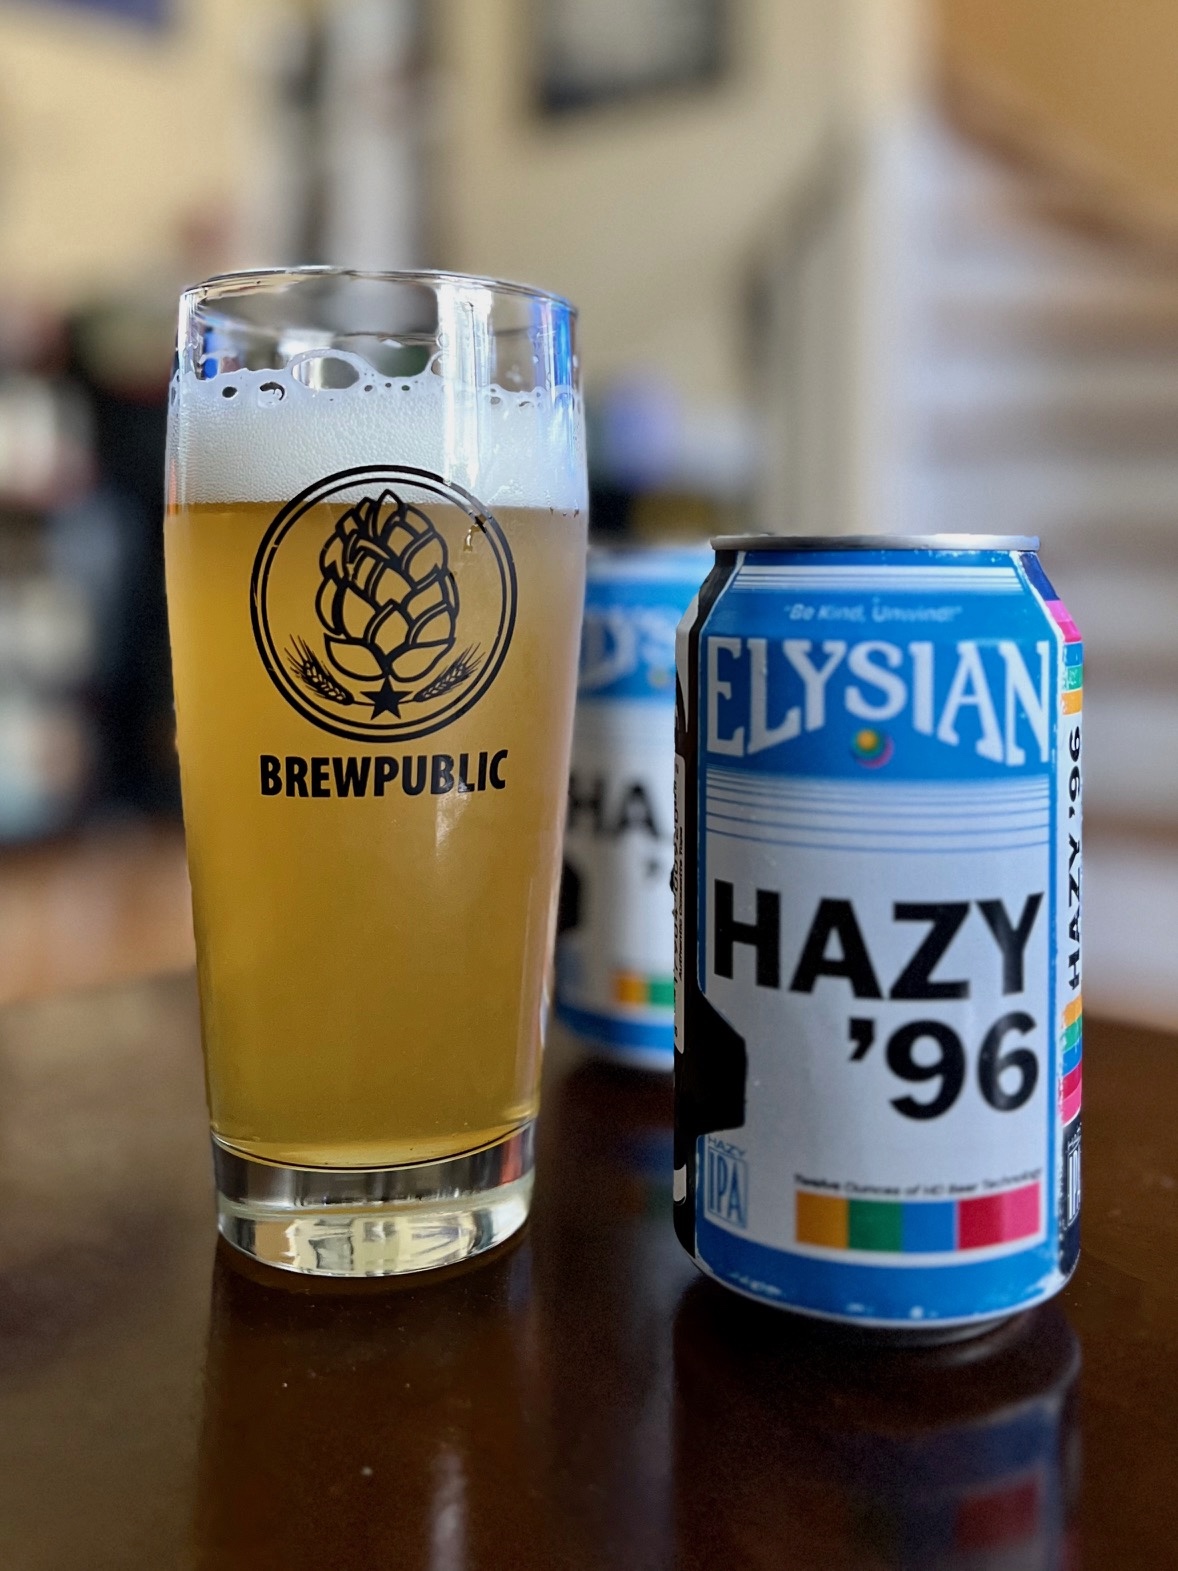 Elysian Brewing has released Hazy '96 in six-pack cans.